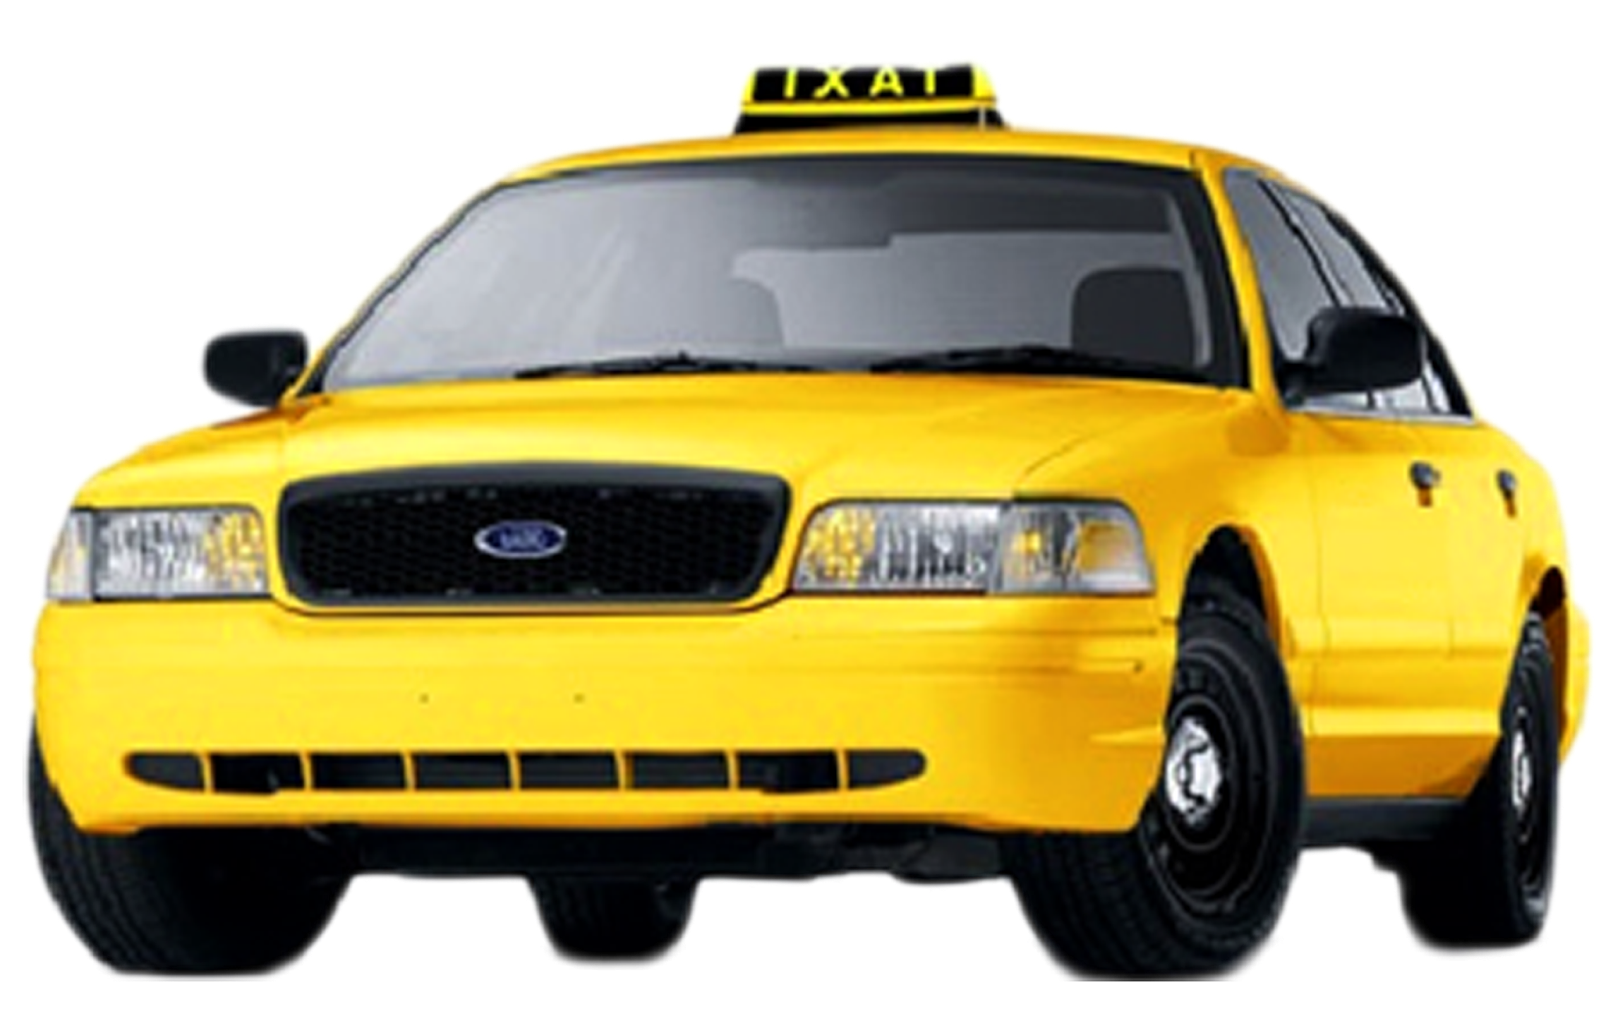 Taxi Cab High-Quality Png PNG Image